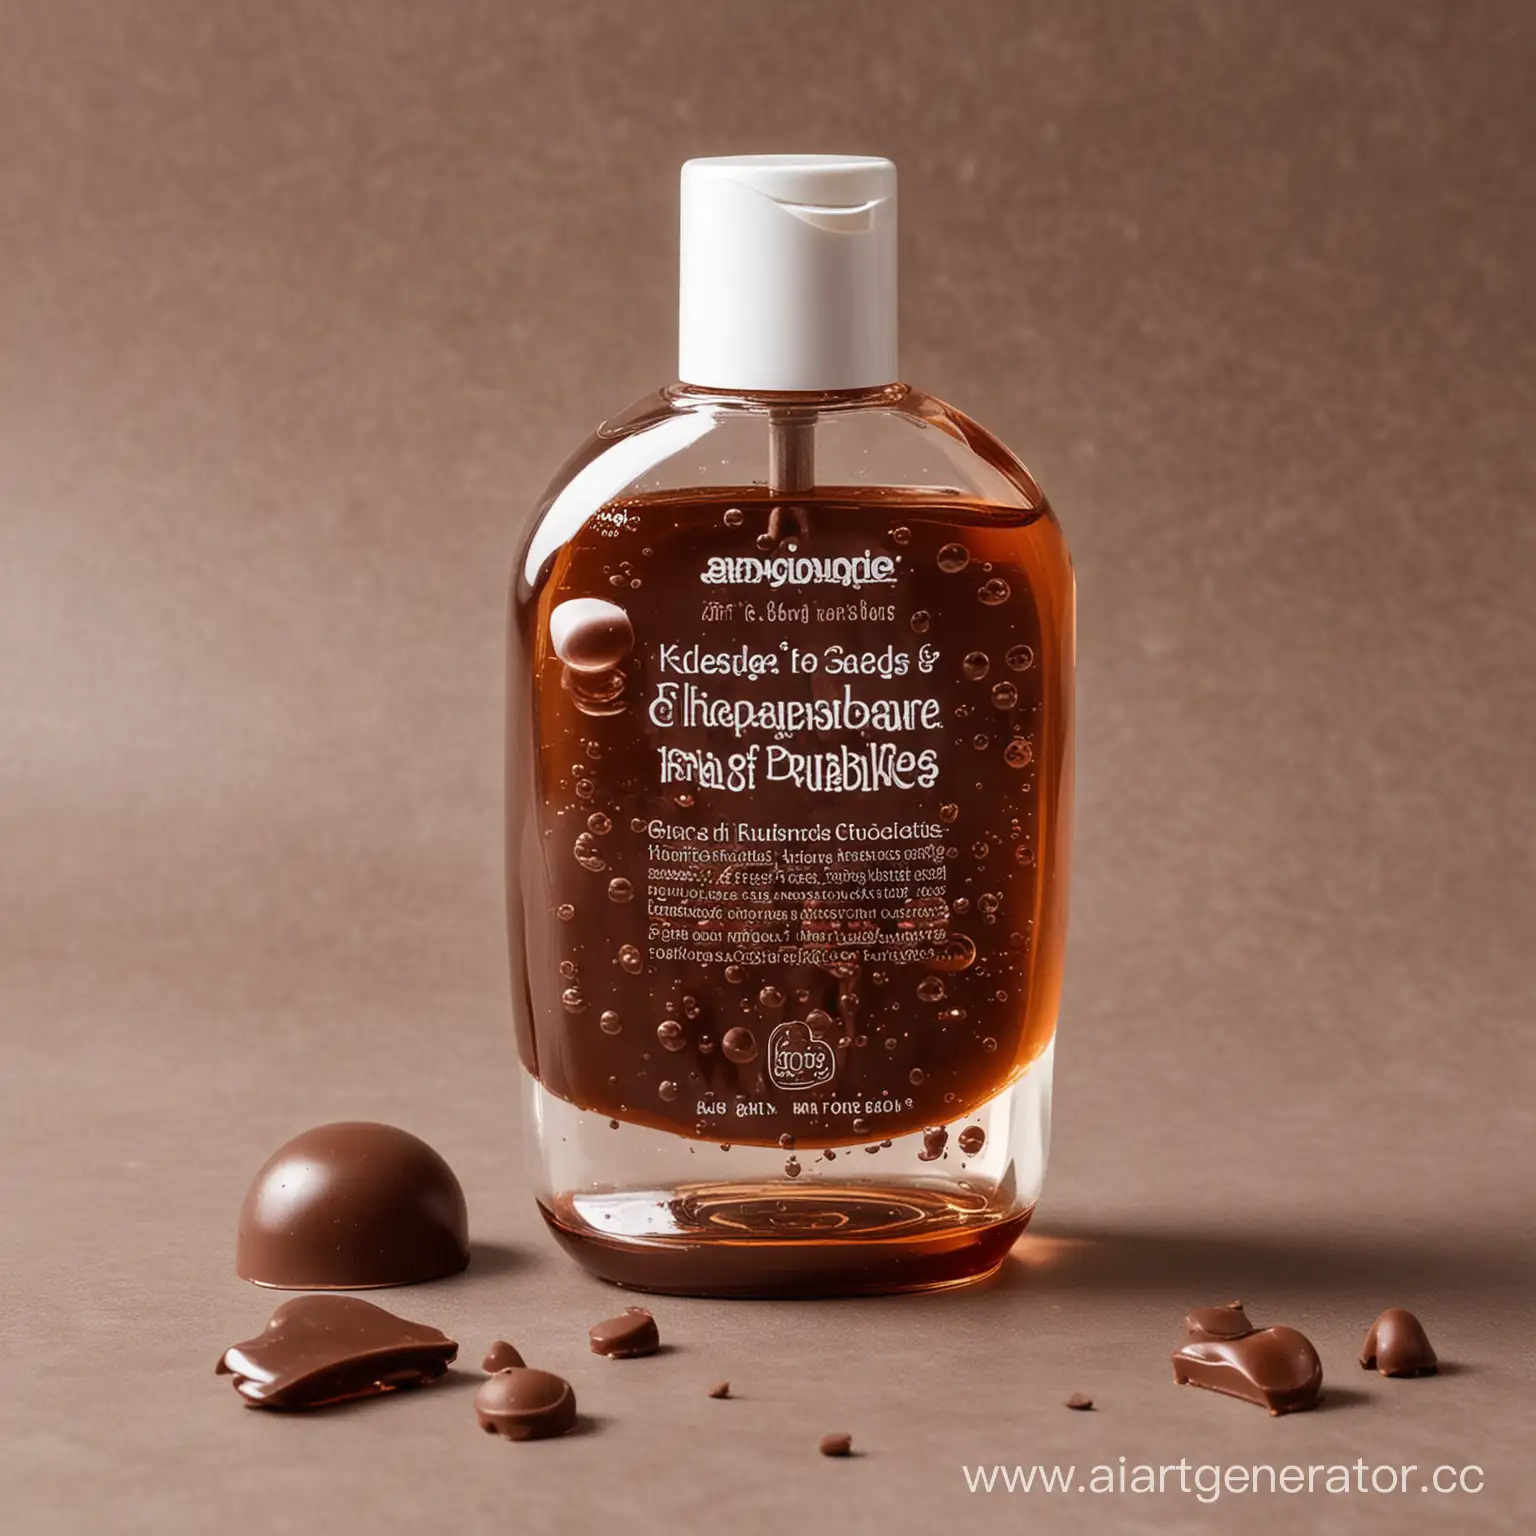 ChocolateColored-Shower-Gel-in-Transparent-Packaging-Amidst-Soap-Bubbles